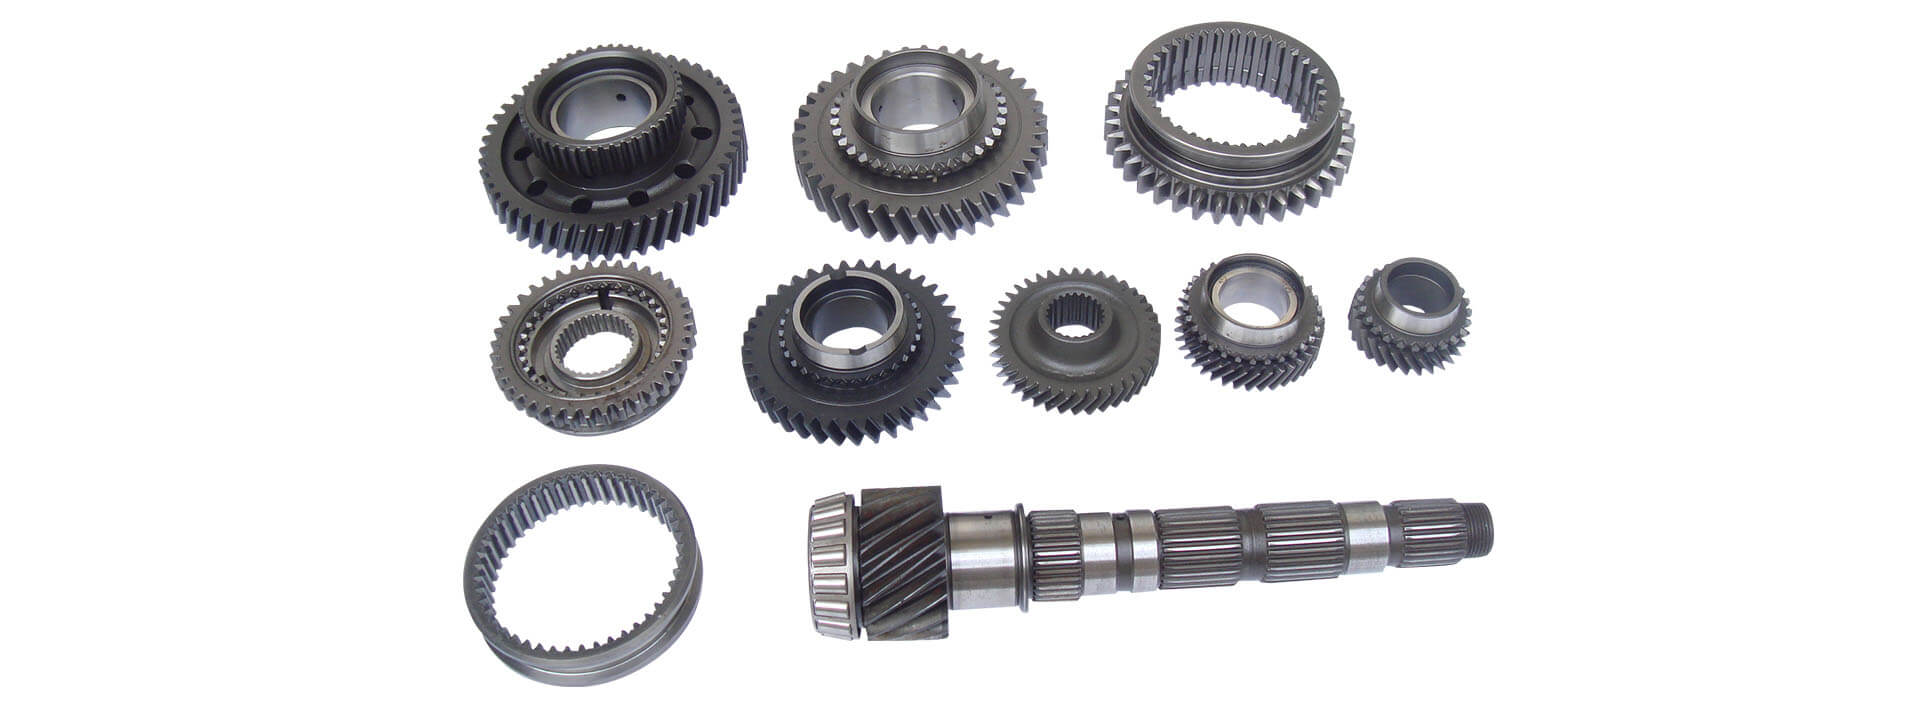 Agriculture Gears